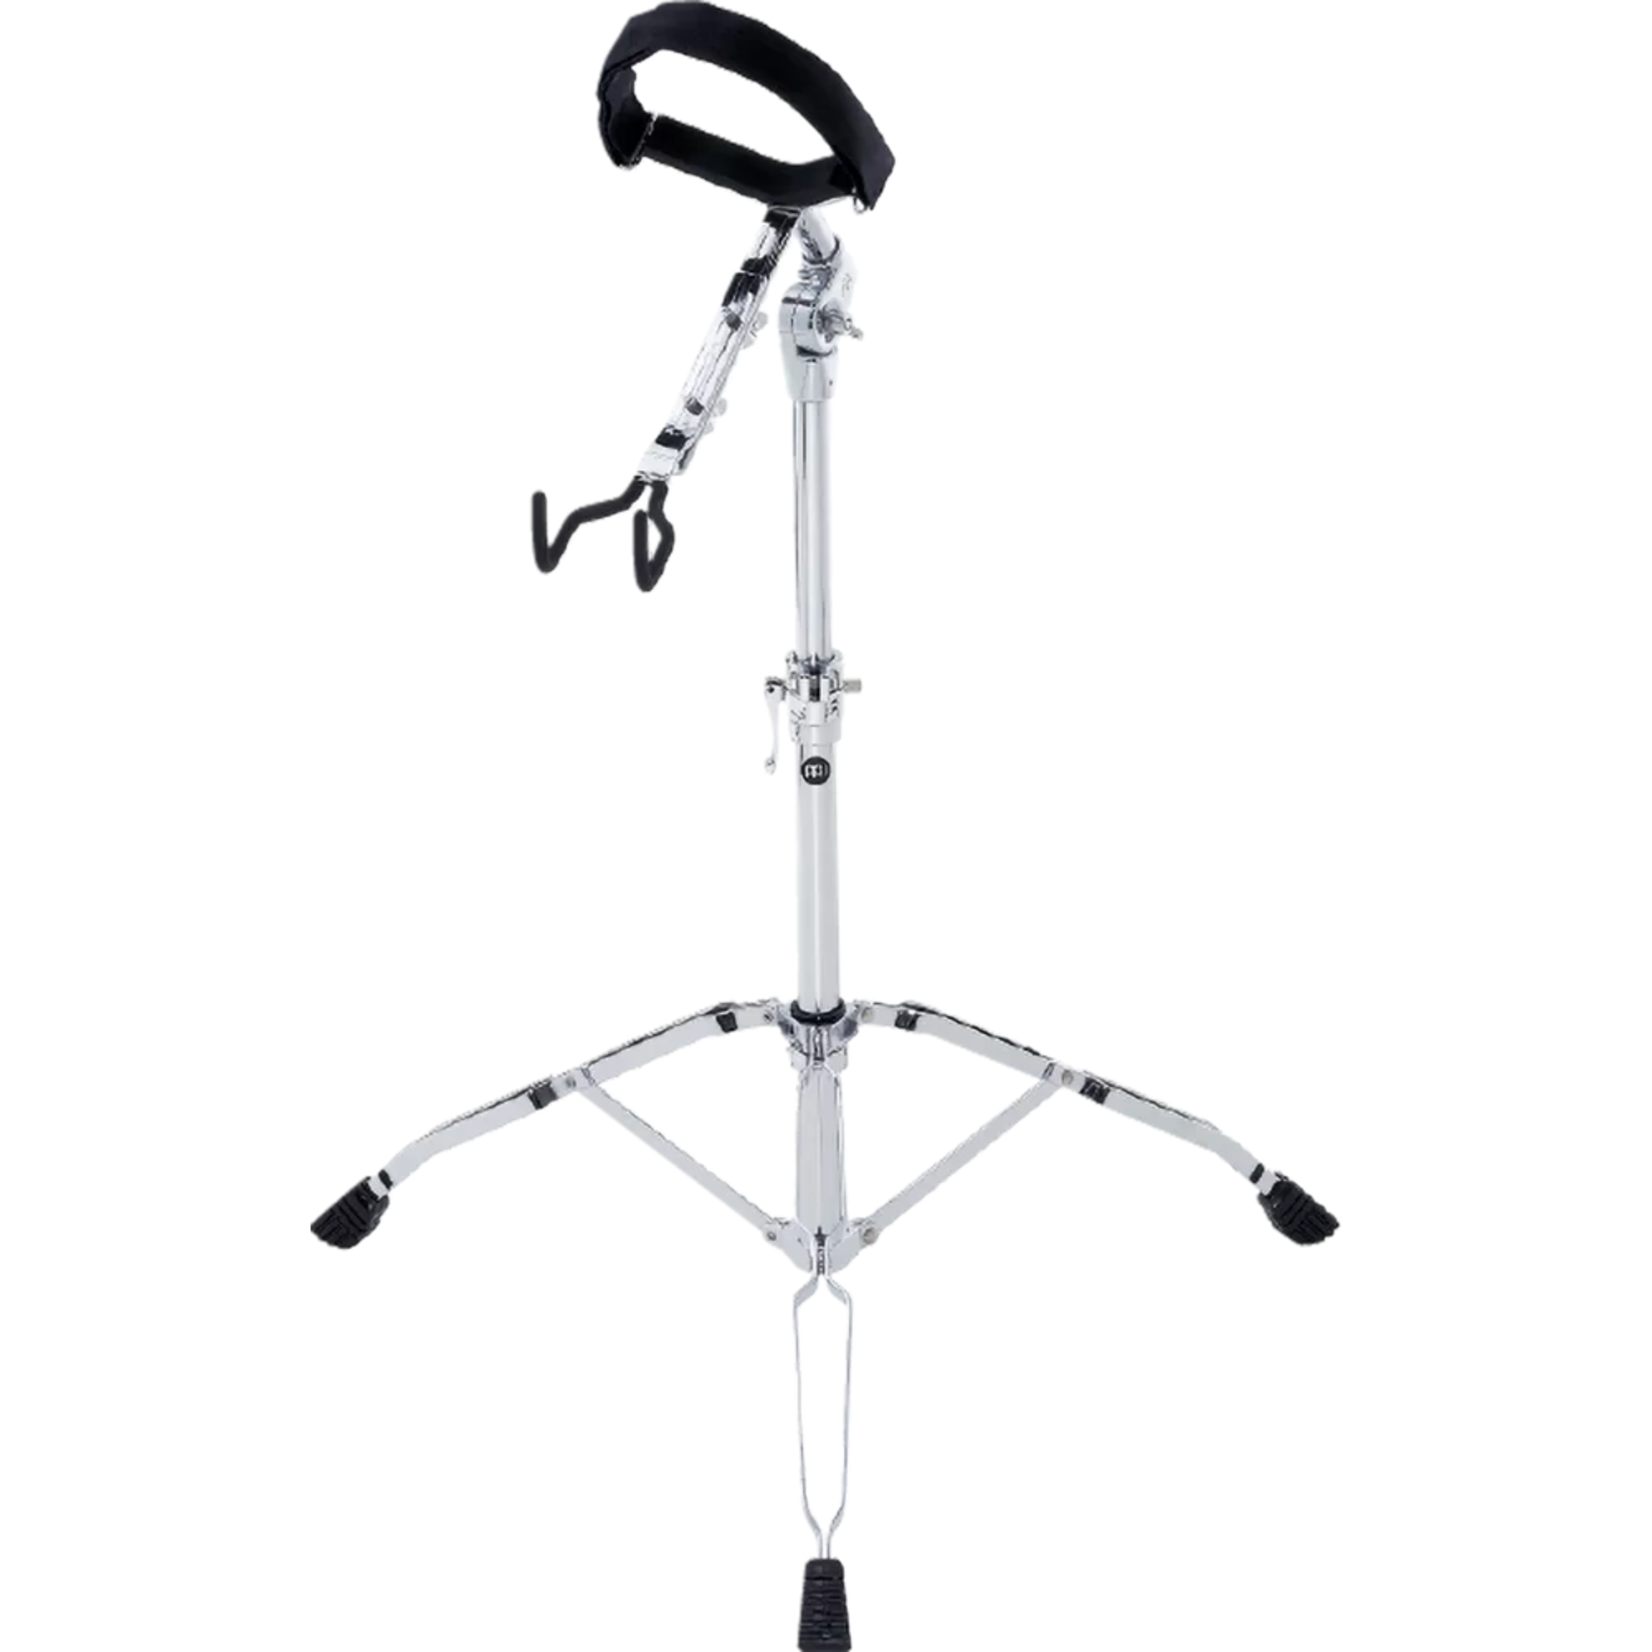 Meinl Meinl Percussion Professional Djembe Stand TMD